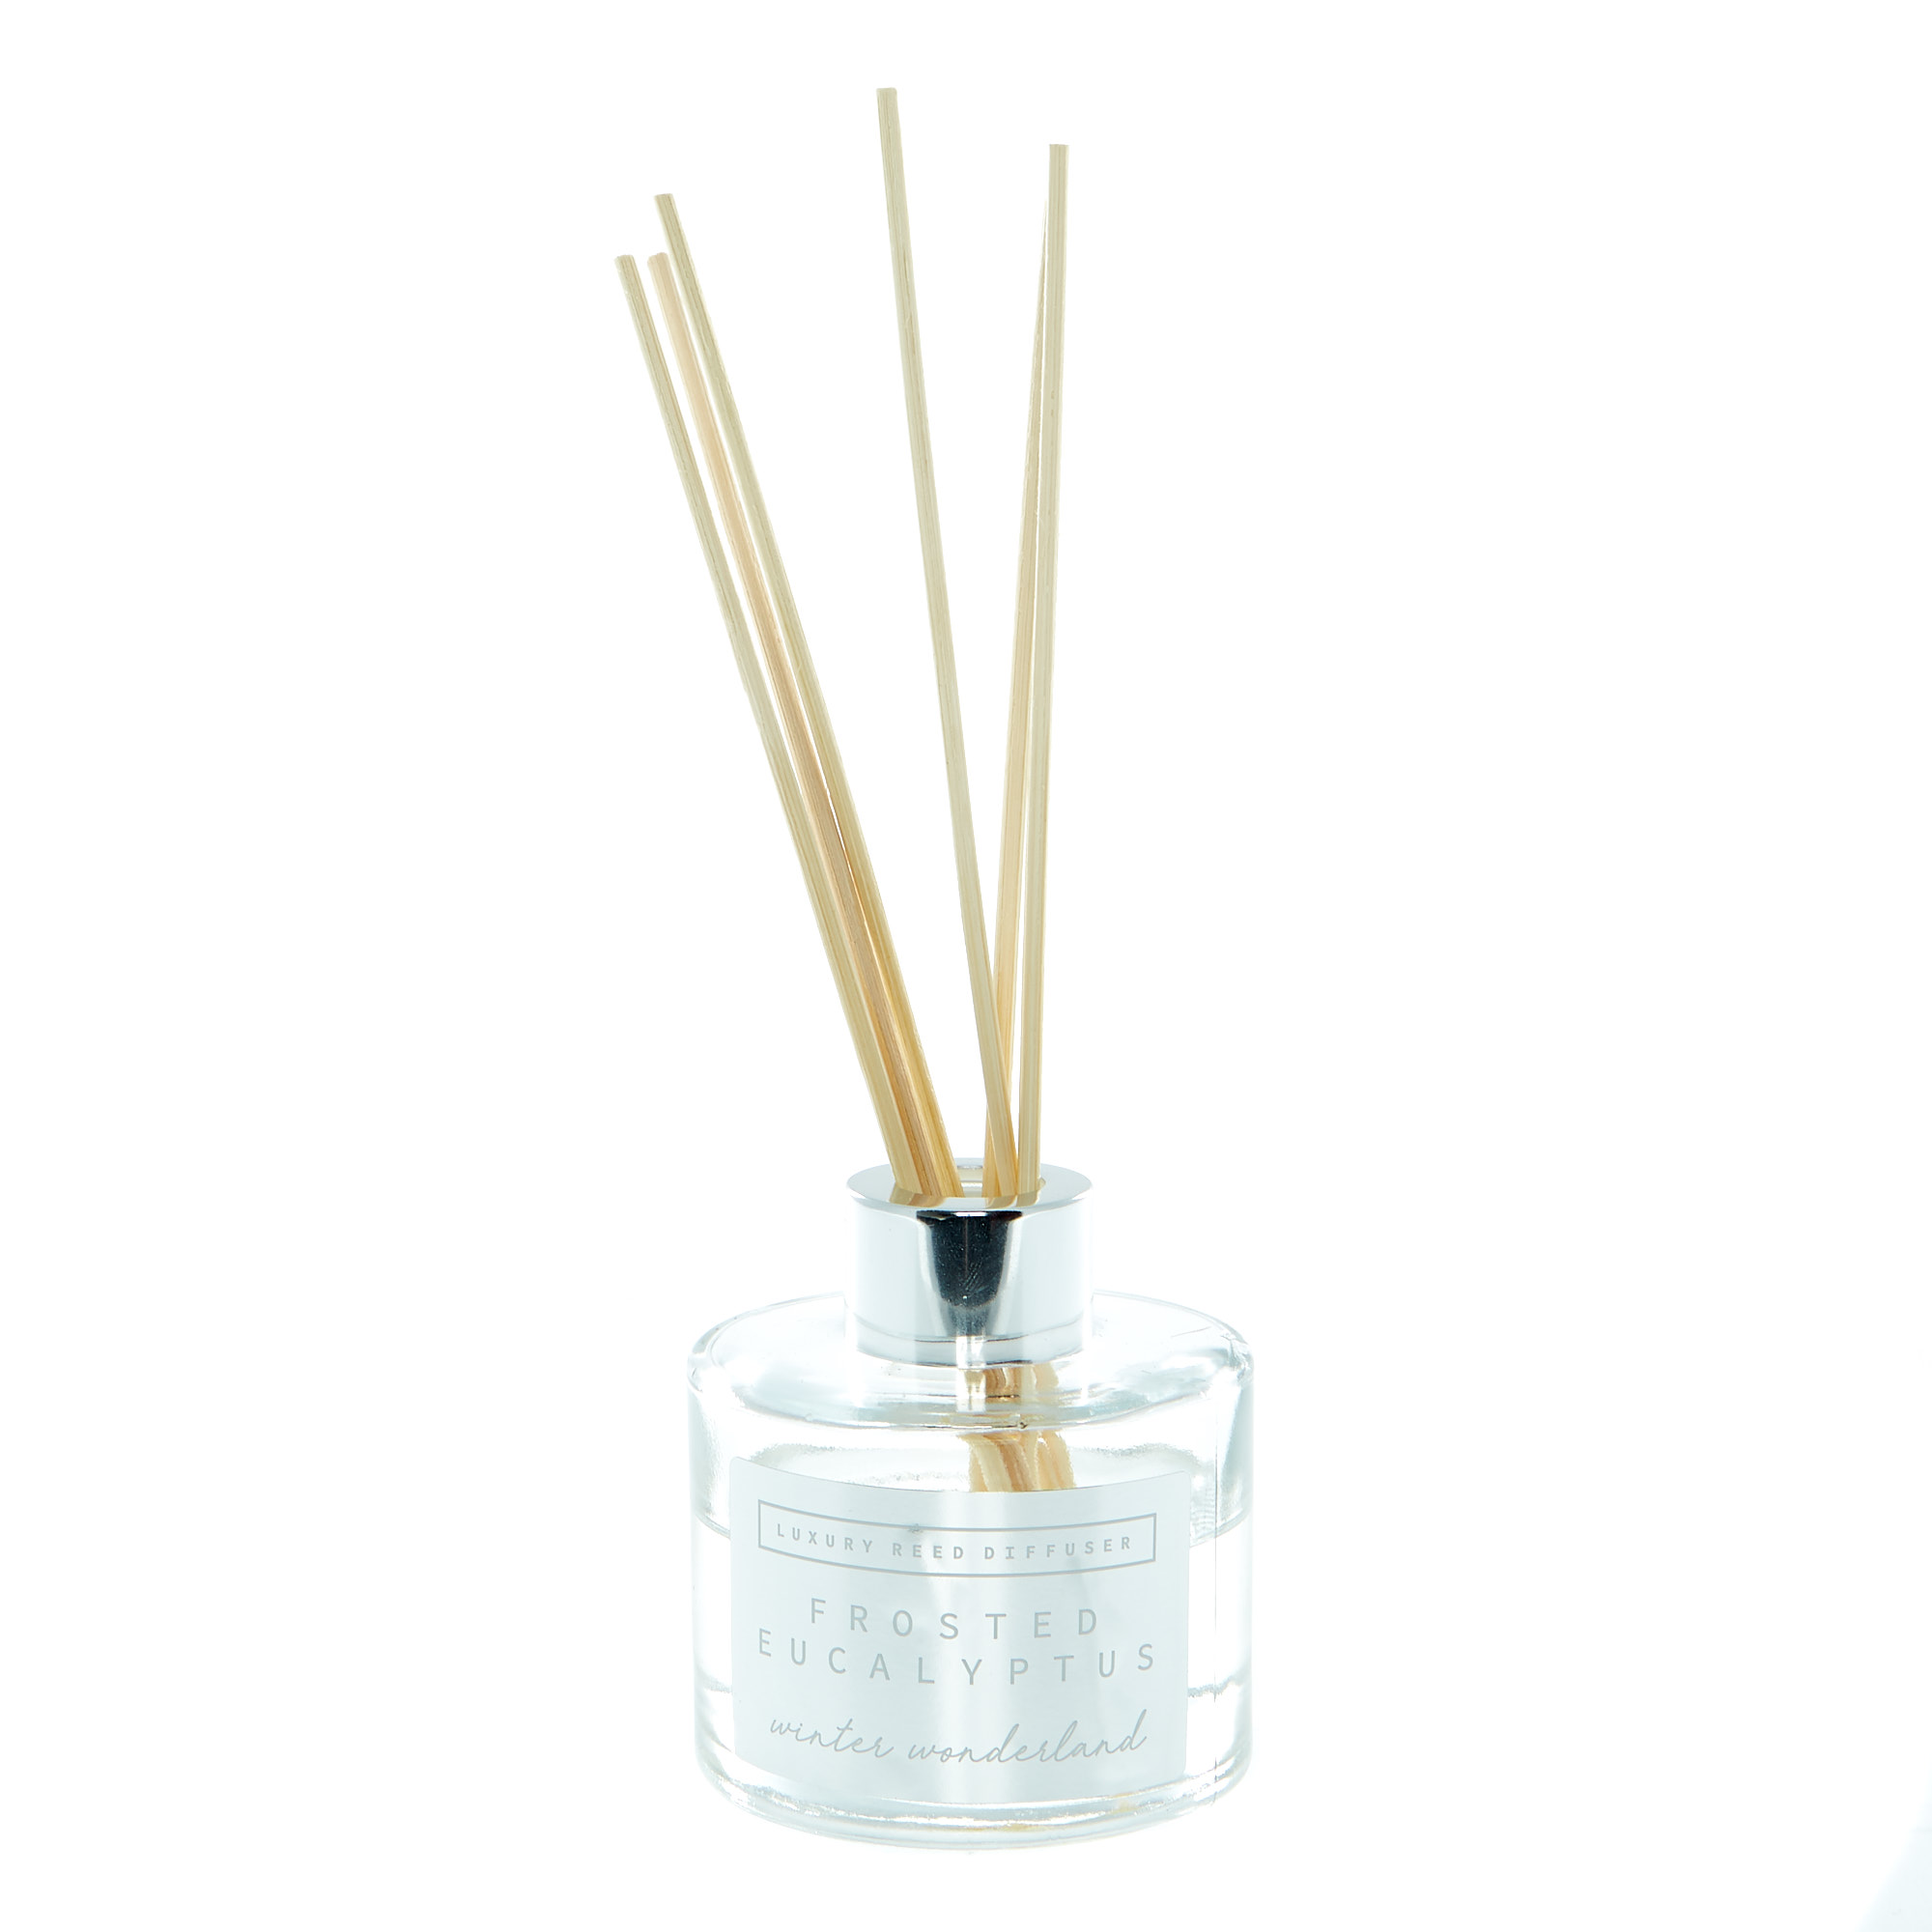 Frosted Eucalyptus Winter Wonderland Luxury Reed Diffuser 